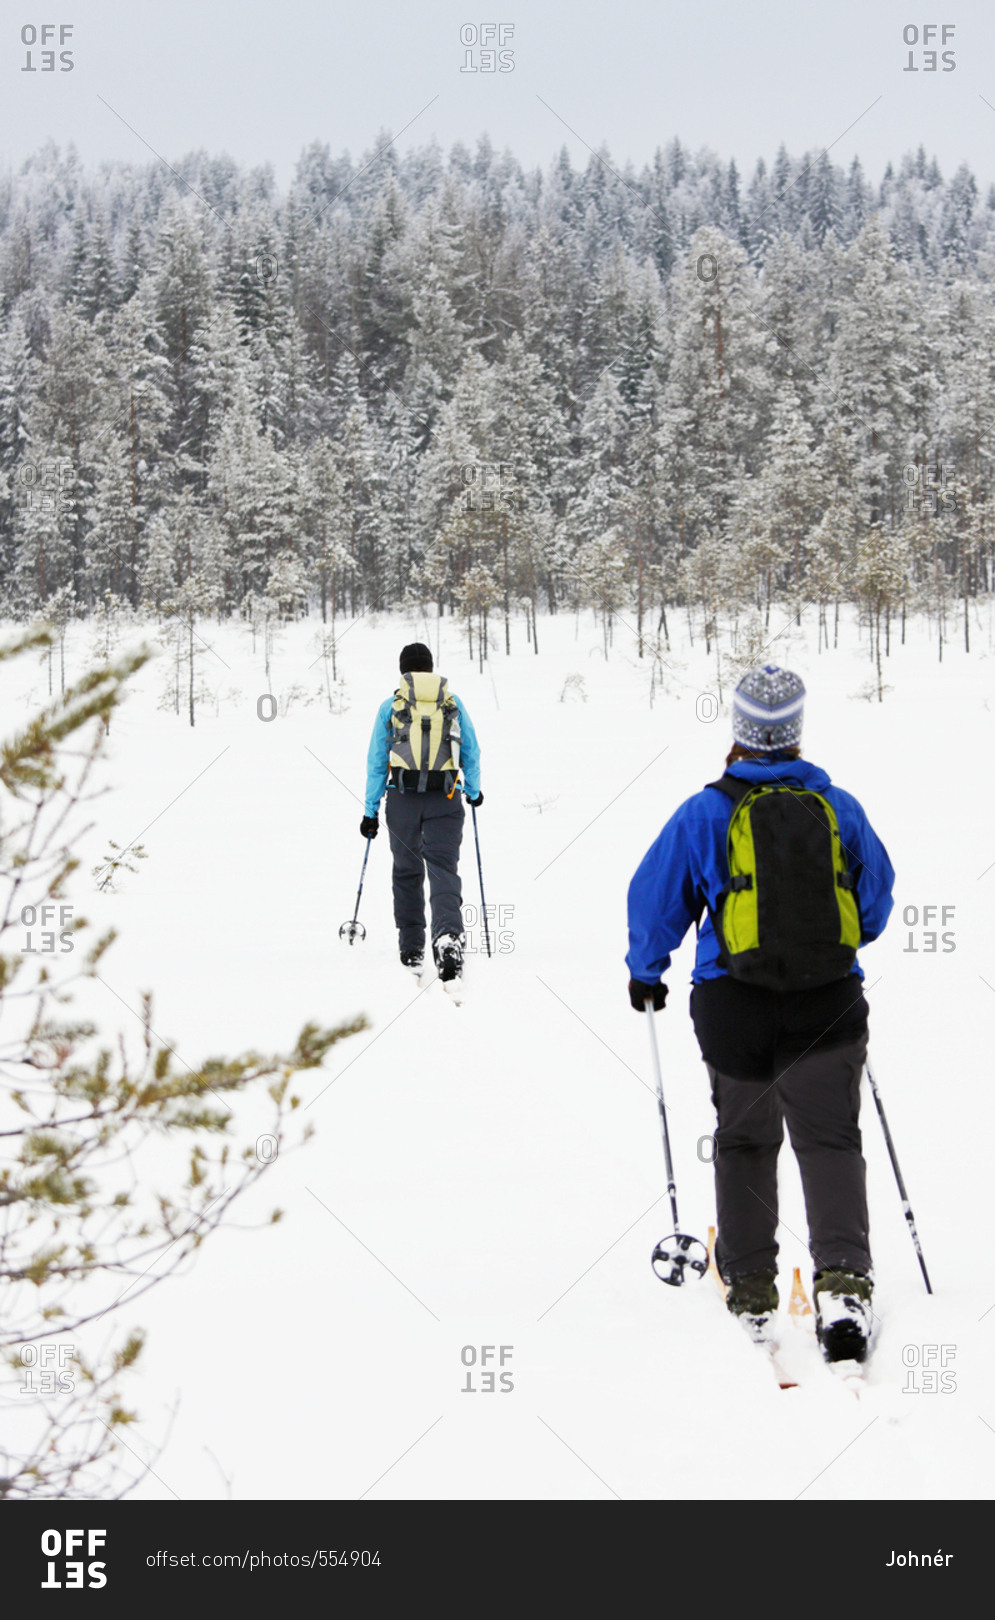 Women cross country skiing in winter forest